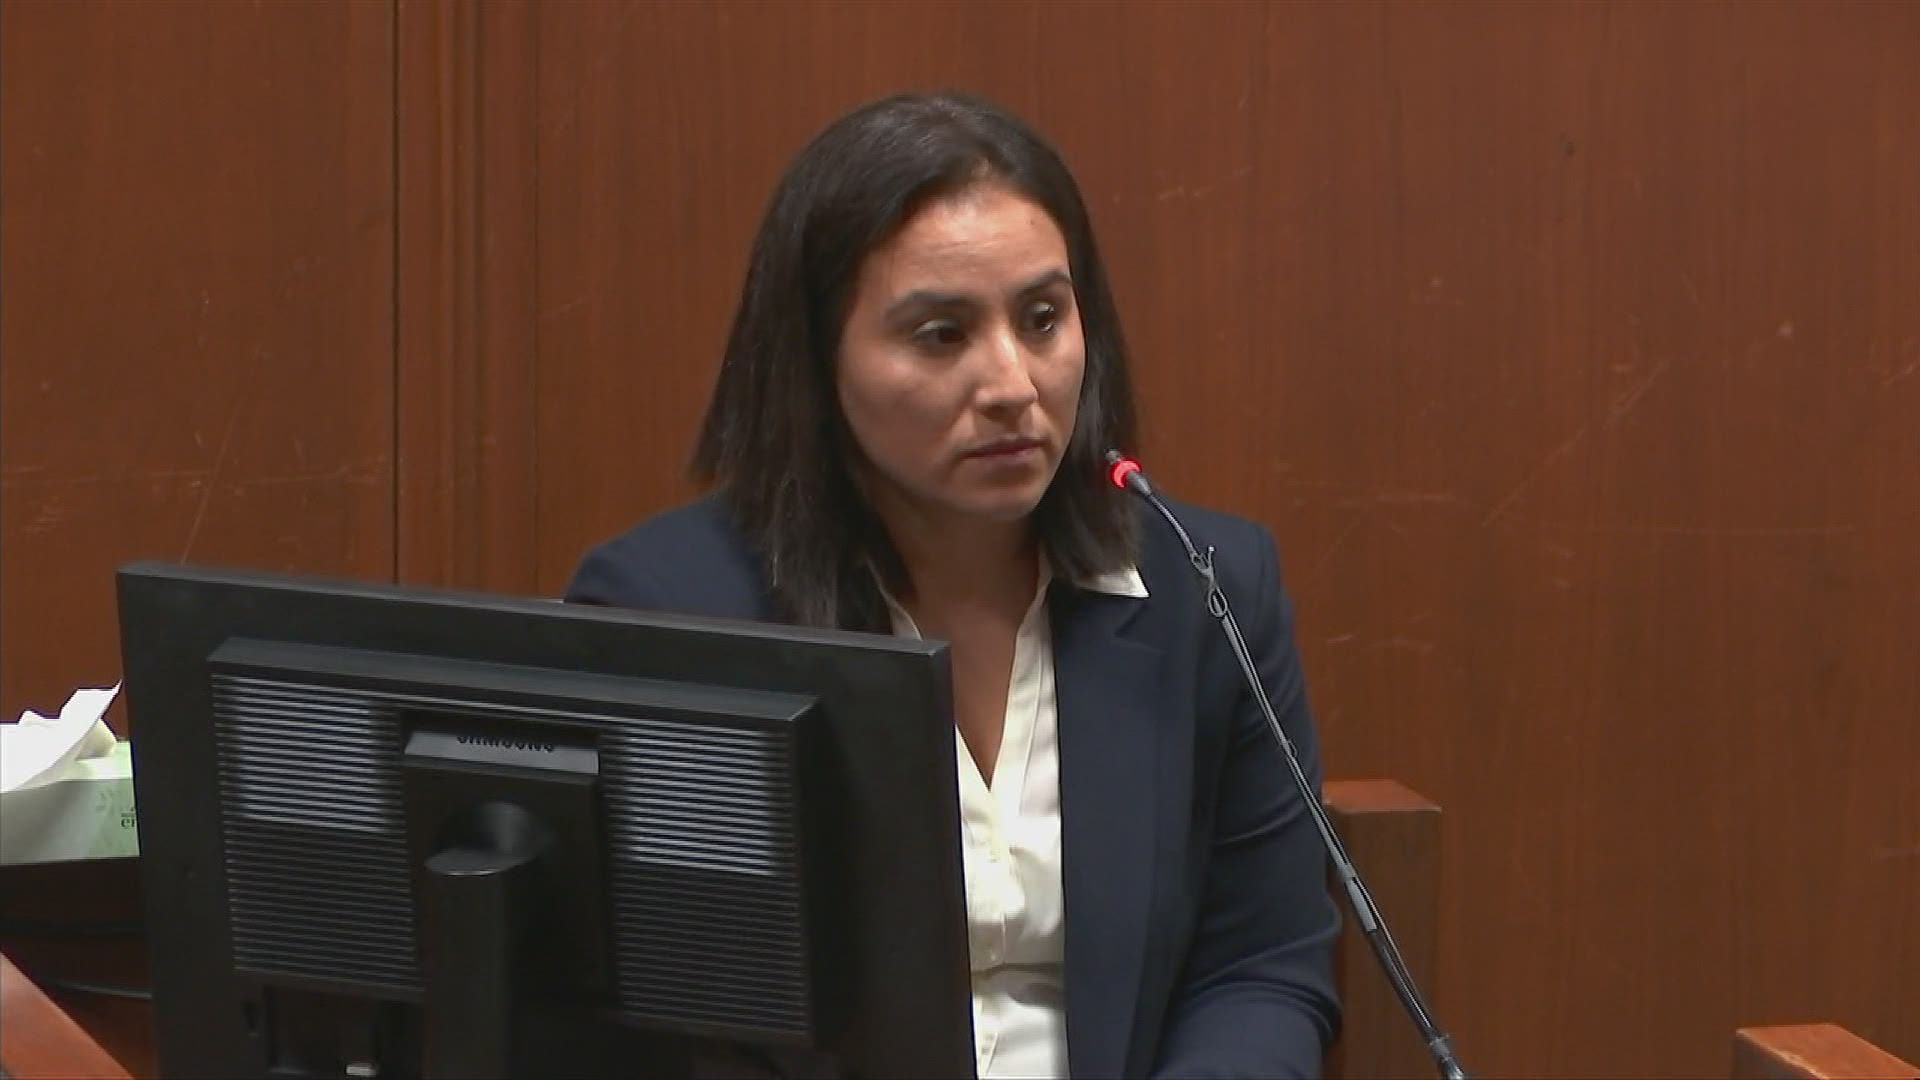 Pamela Romero told the jury Thursday that after speaking with Bahena Rivera in Spanish, the suspect led police to Tibbetts' body in a cornfield.